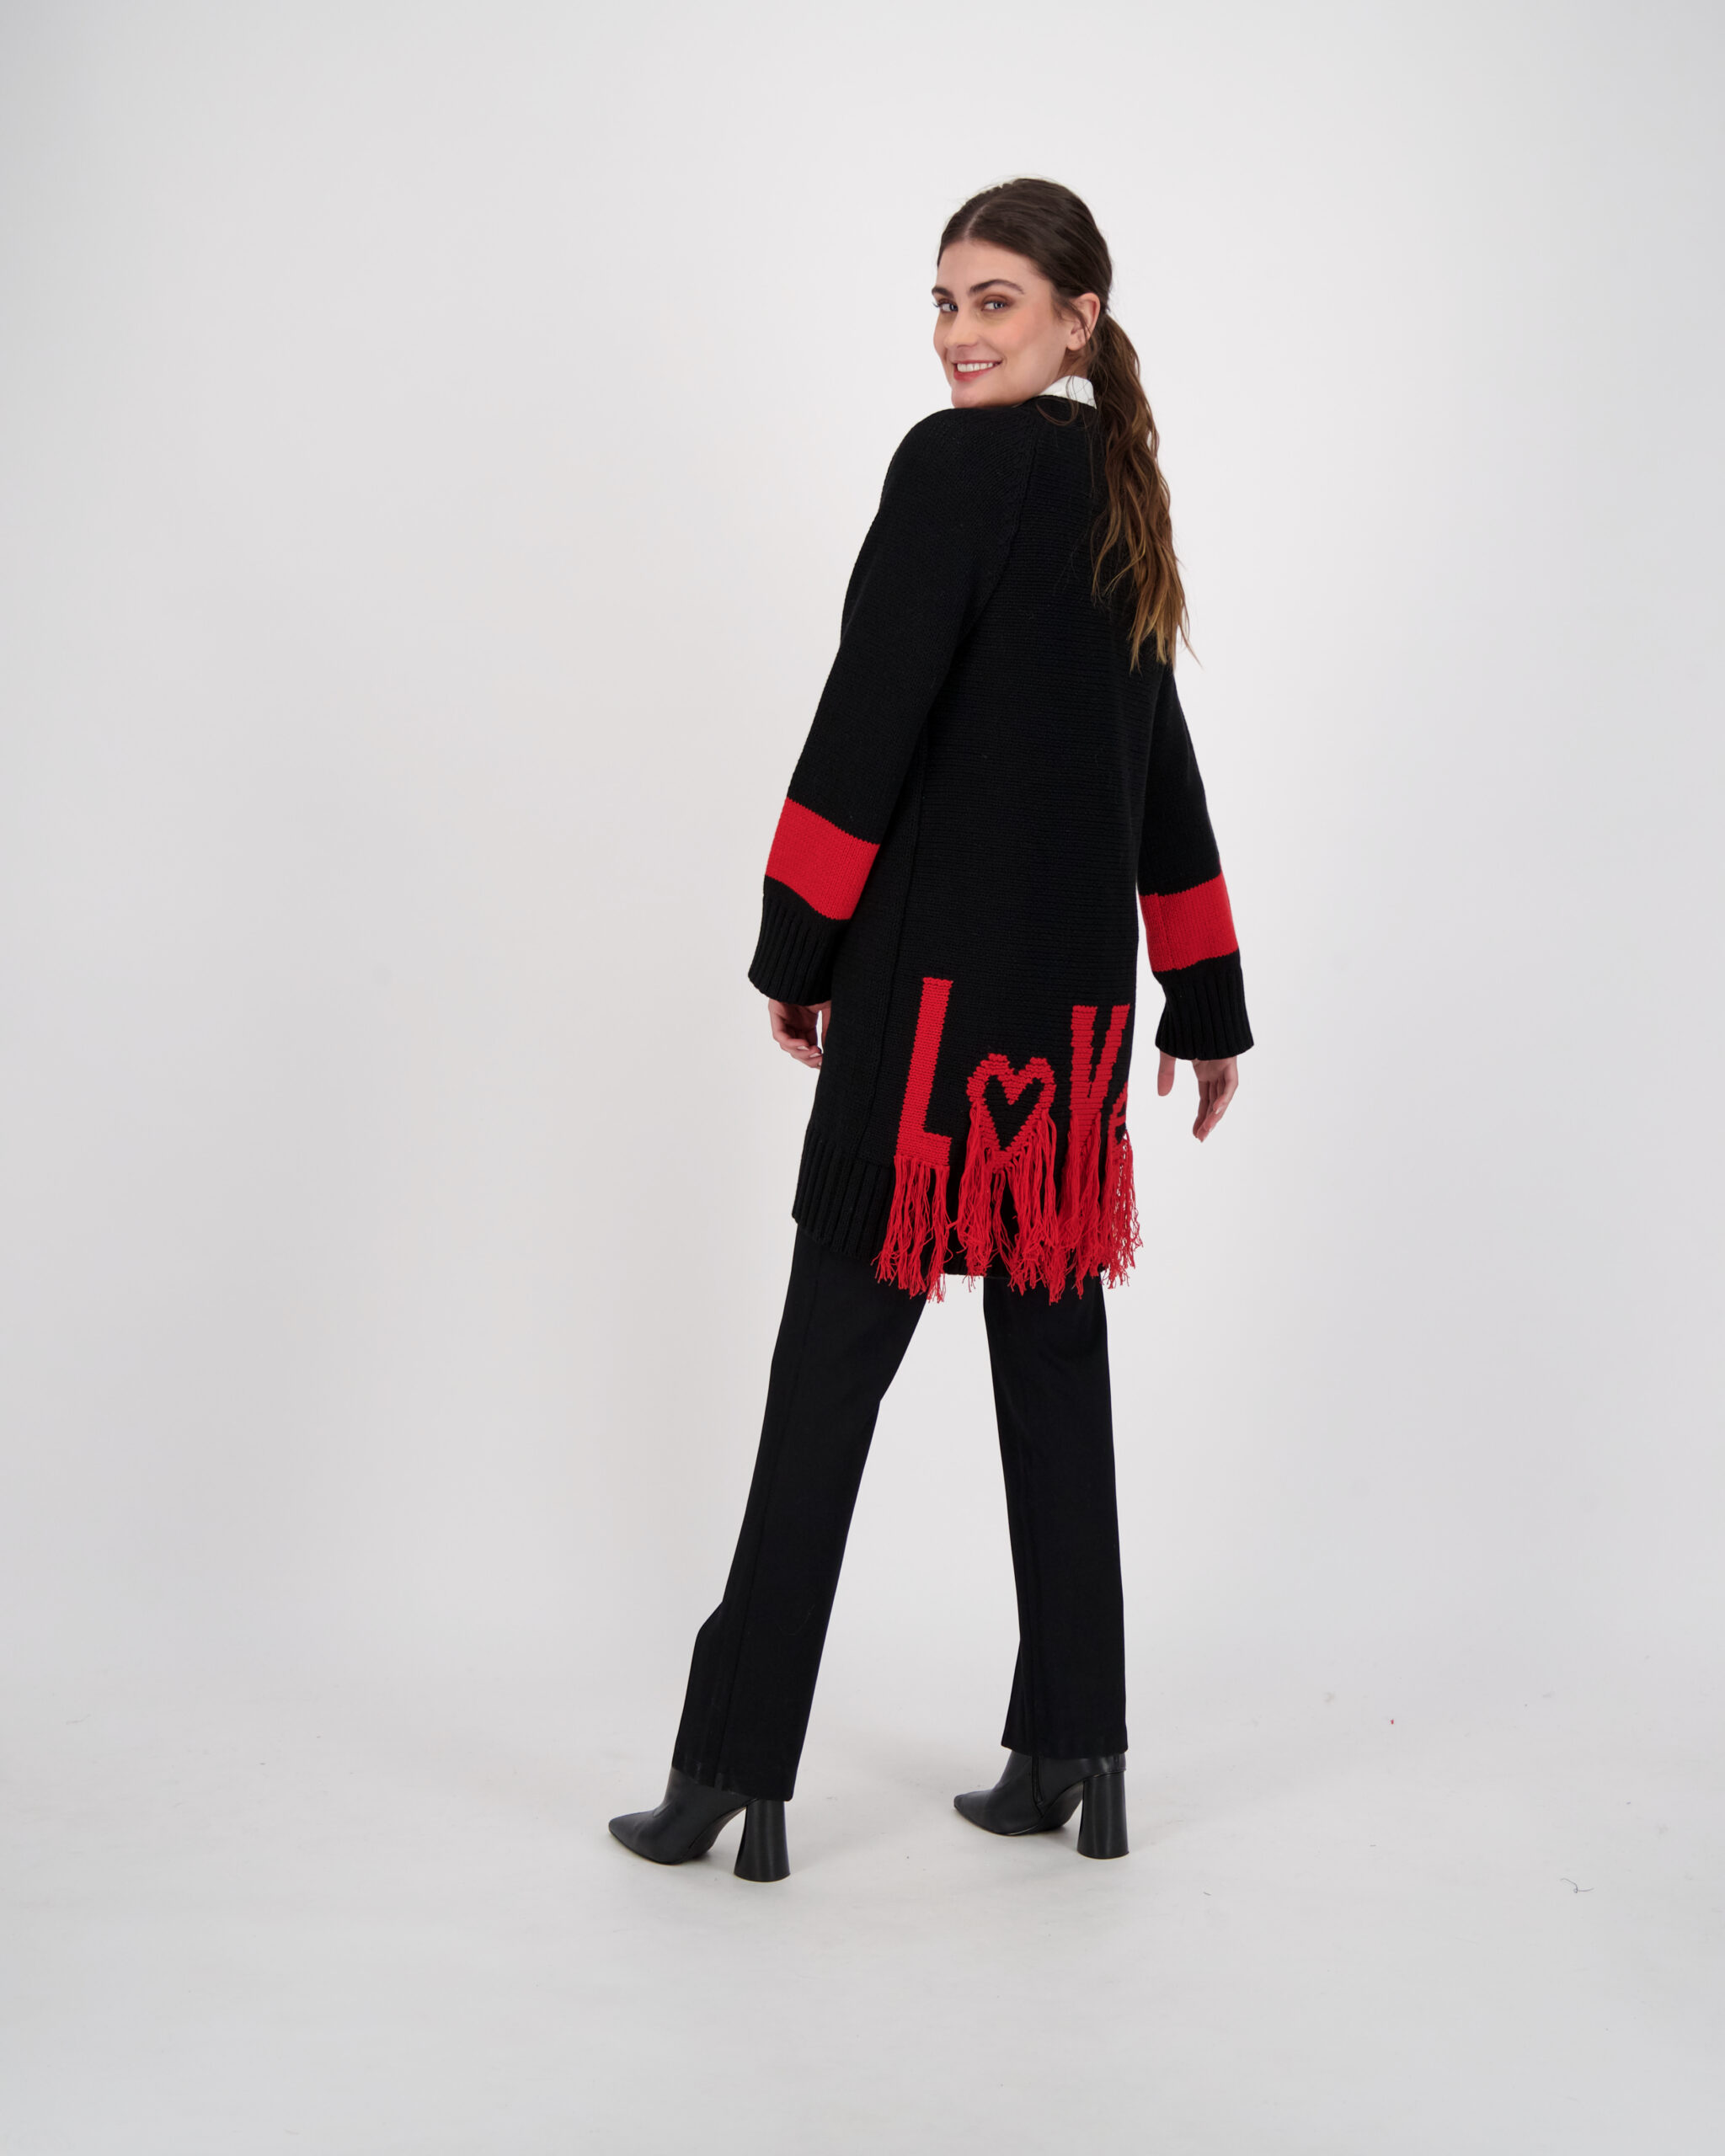 Fringe Back Cardigan by Gabby Isabella in Black/Red